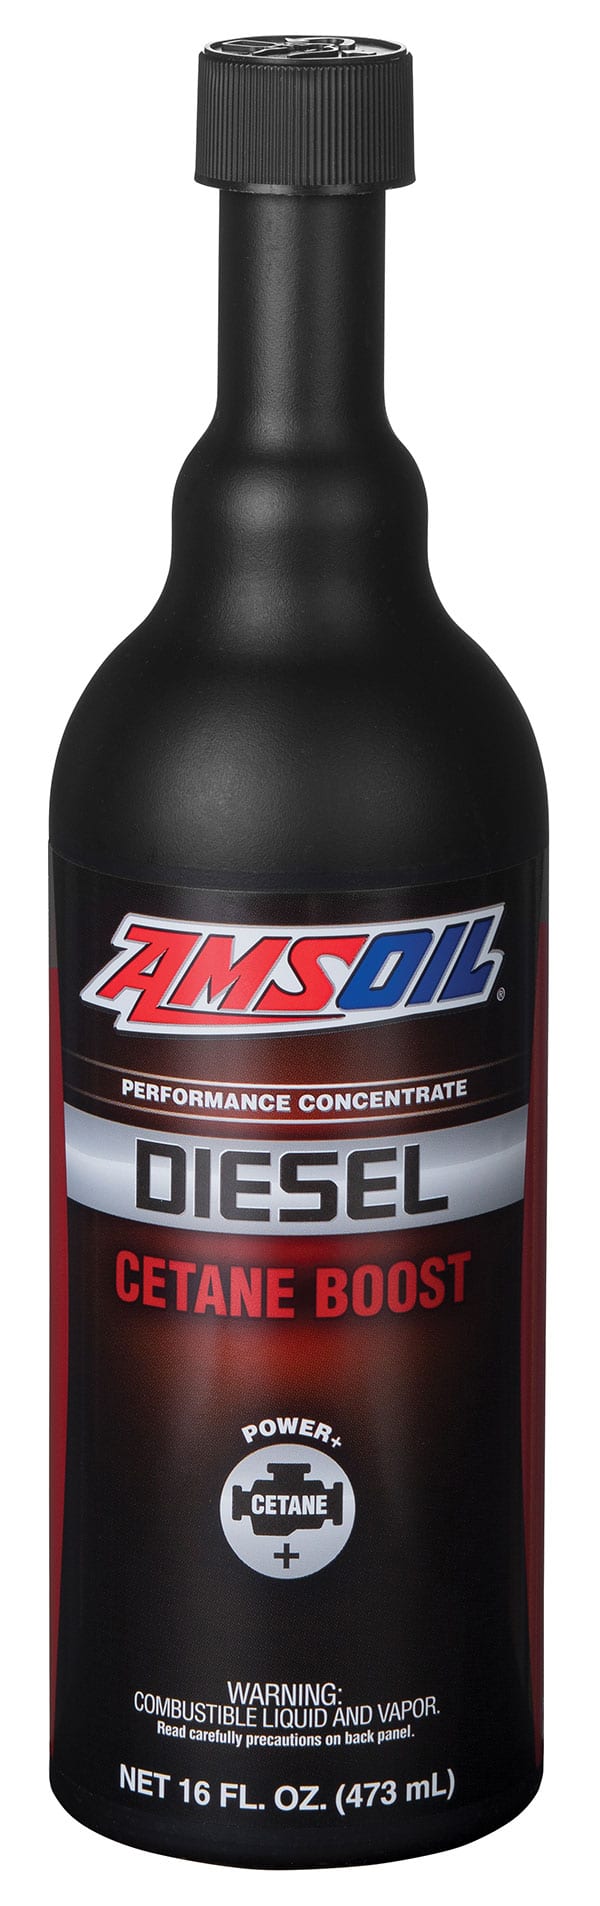 A bottle of AMSOIL Diesel Cetane Boost helps deliver confidence in your diesel’s performance. Its formula eliminates specific performance issues.